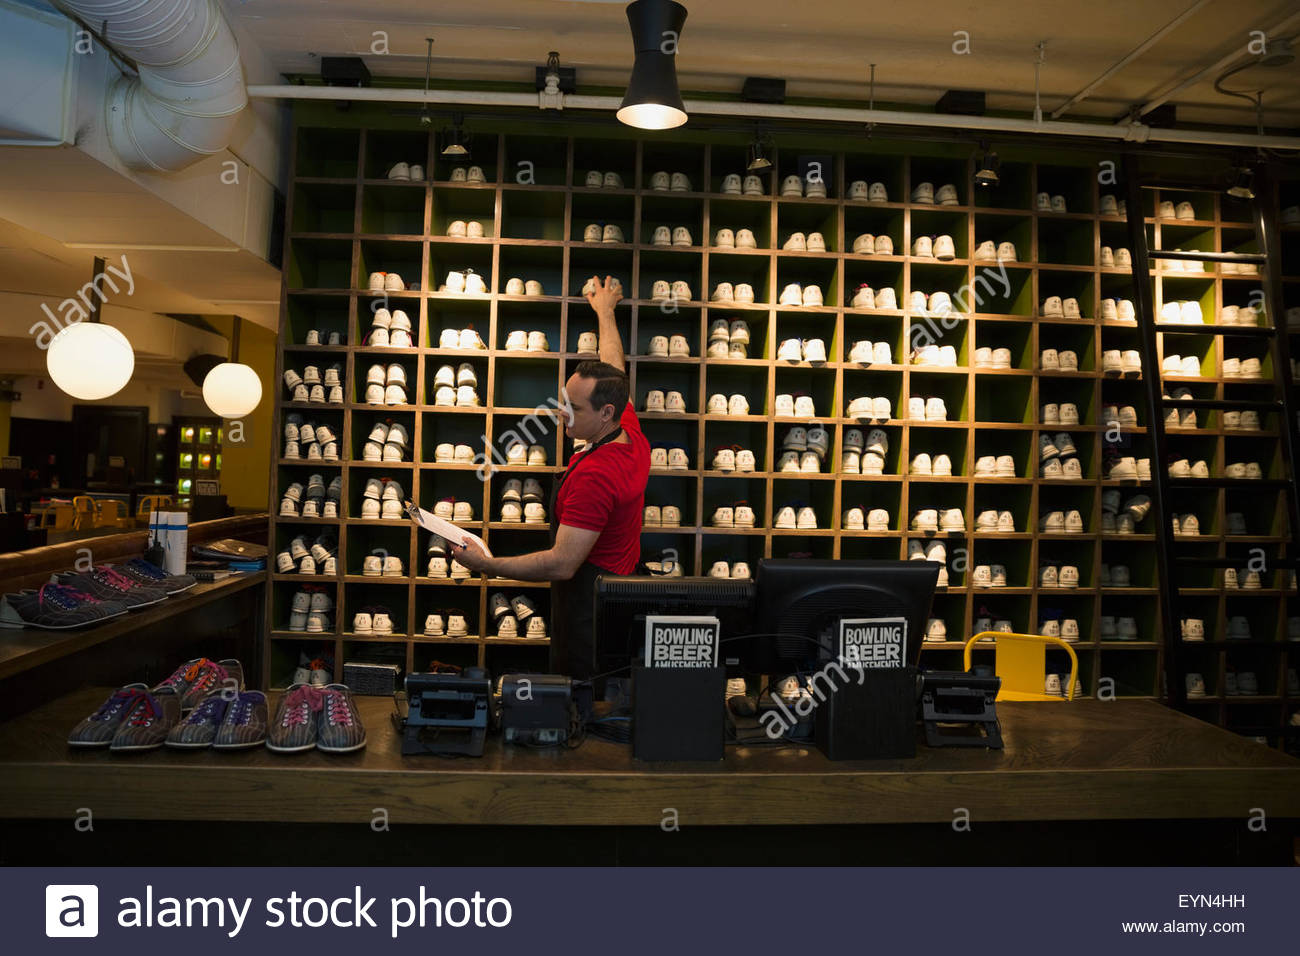 Worker with clipboard reaching for bowling shoes Stock Photo